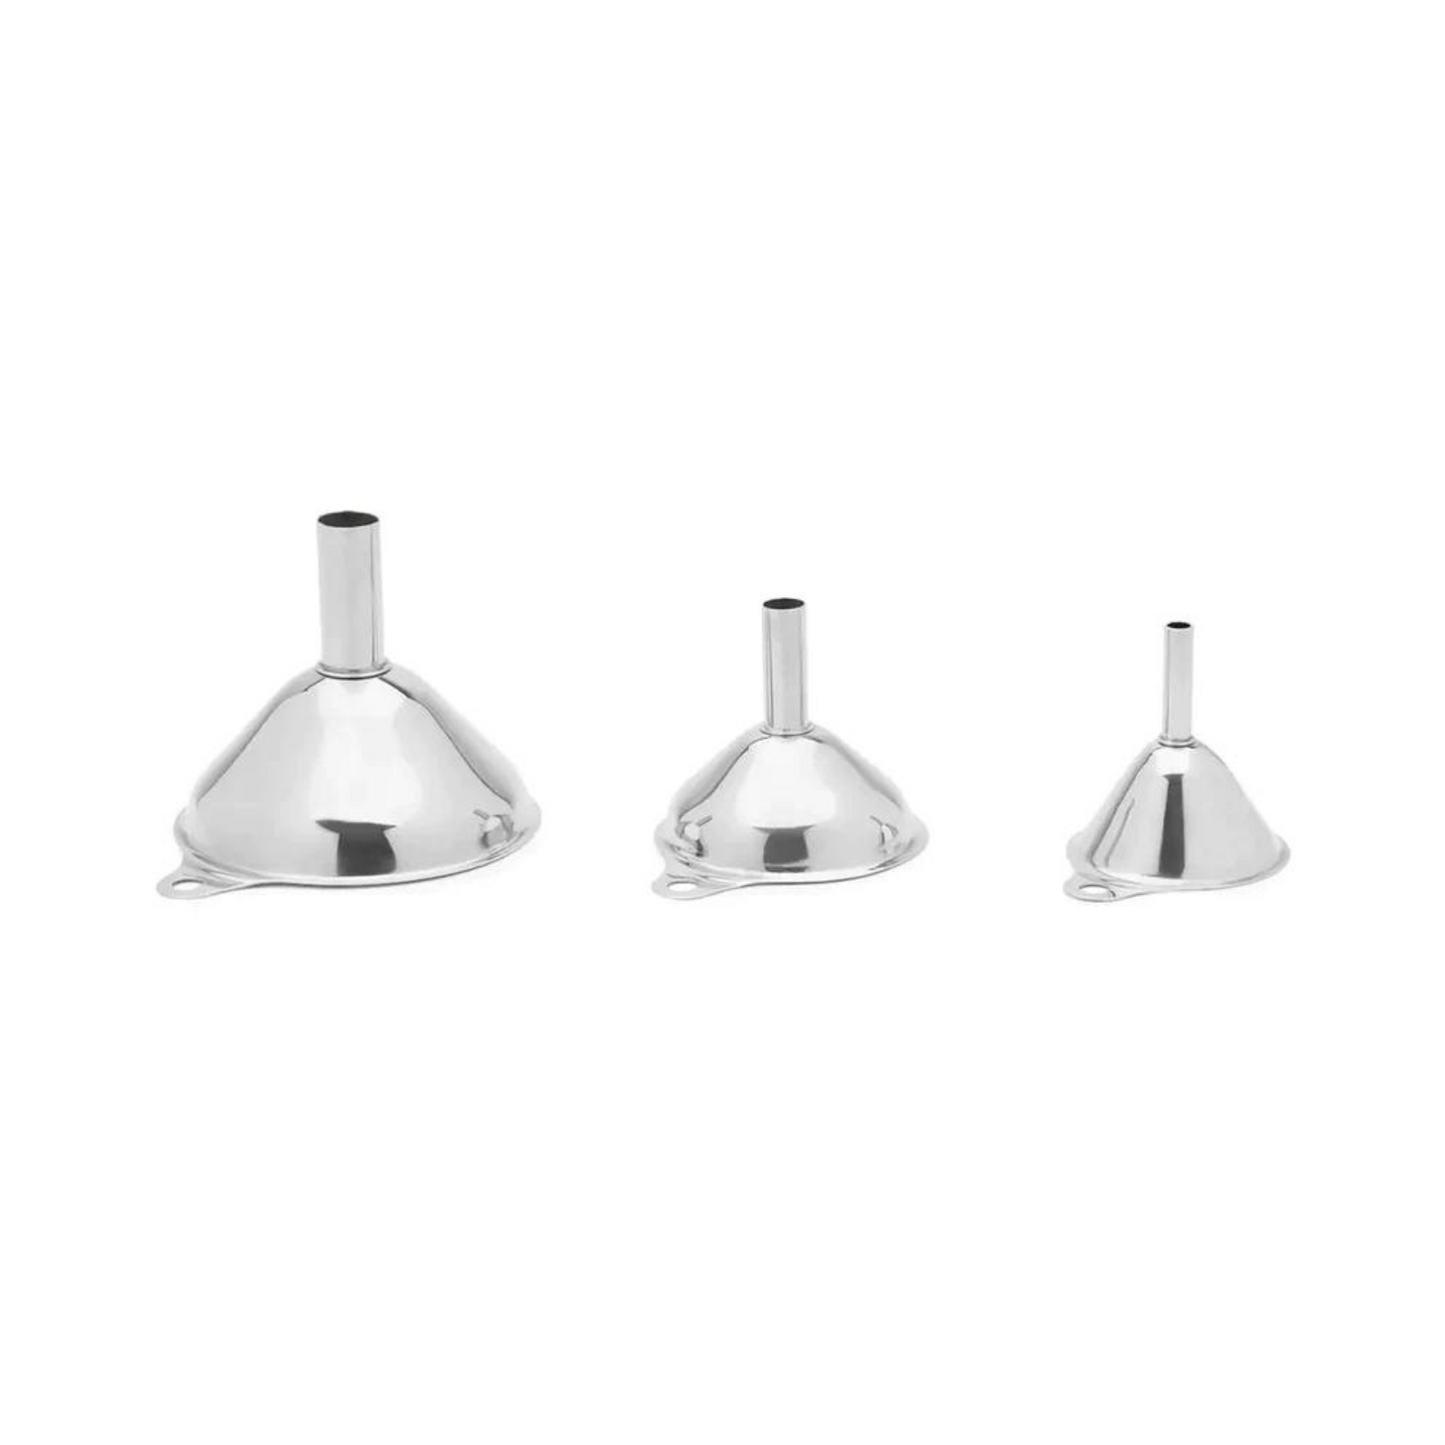 Stainless Steel Funnel - 3 Piece Set